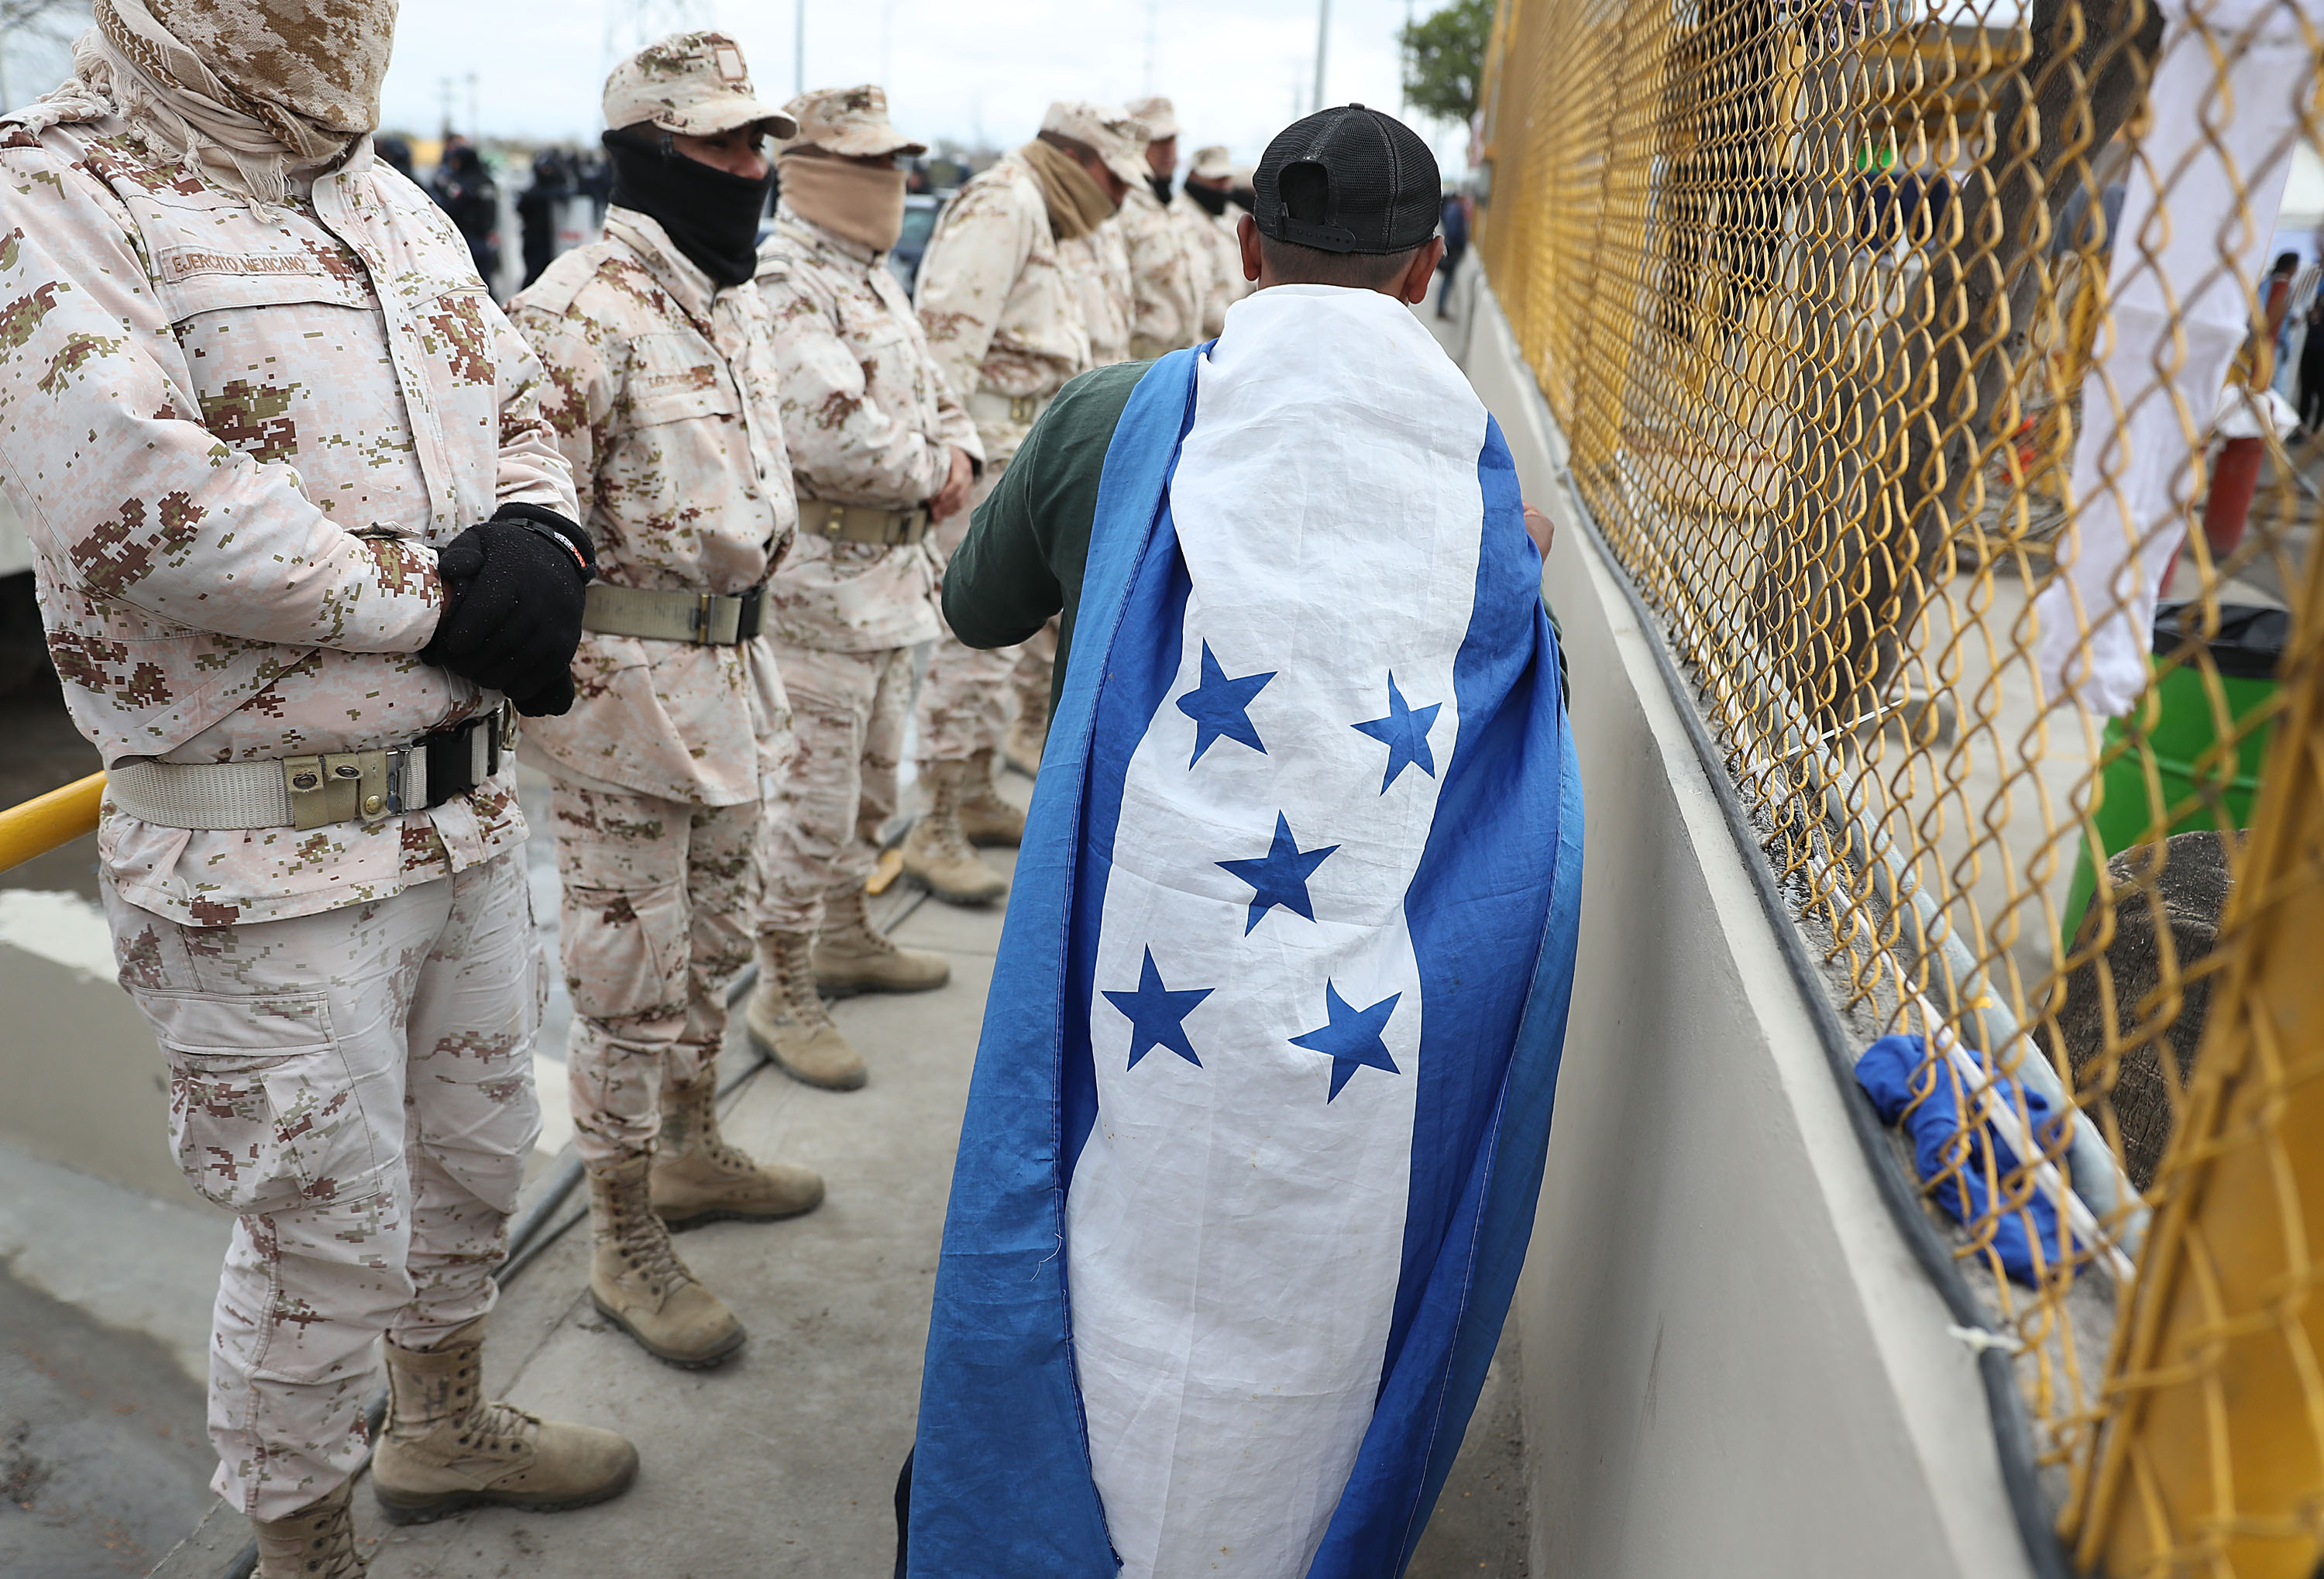 Jose Martinez, from Honduras, wears his countries flag as he joins other migrants, most of whom are part of a recently arrived caravan, at a migrant hostel as they wait to apply for asylum in to the United States on February 09, 2019 in Piedras Negras, Mexico. (Photo by Joe Raedle/Getty Images)